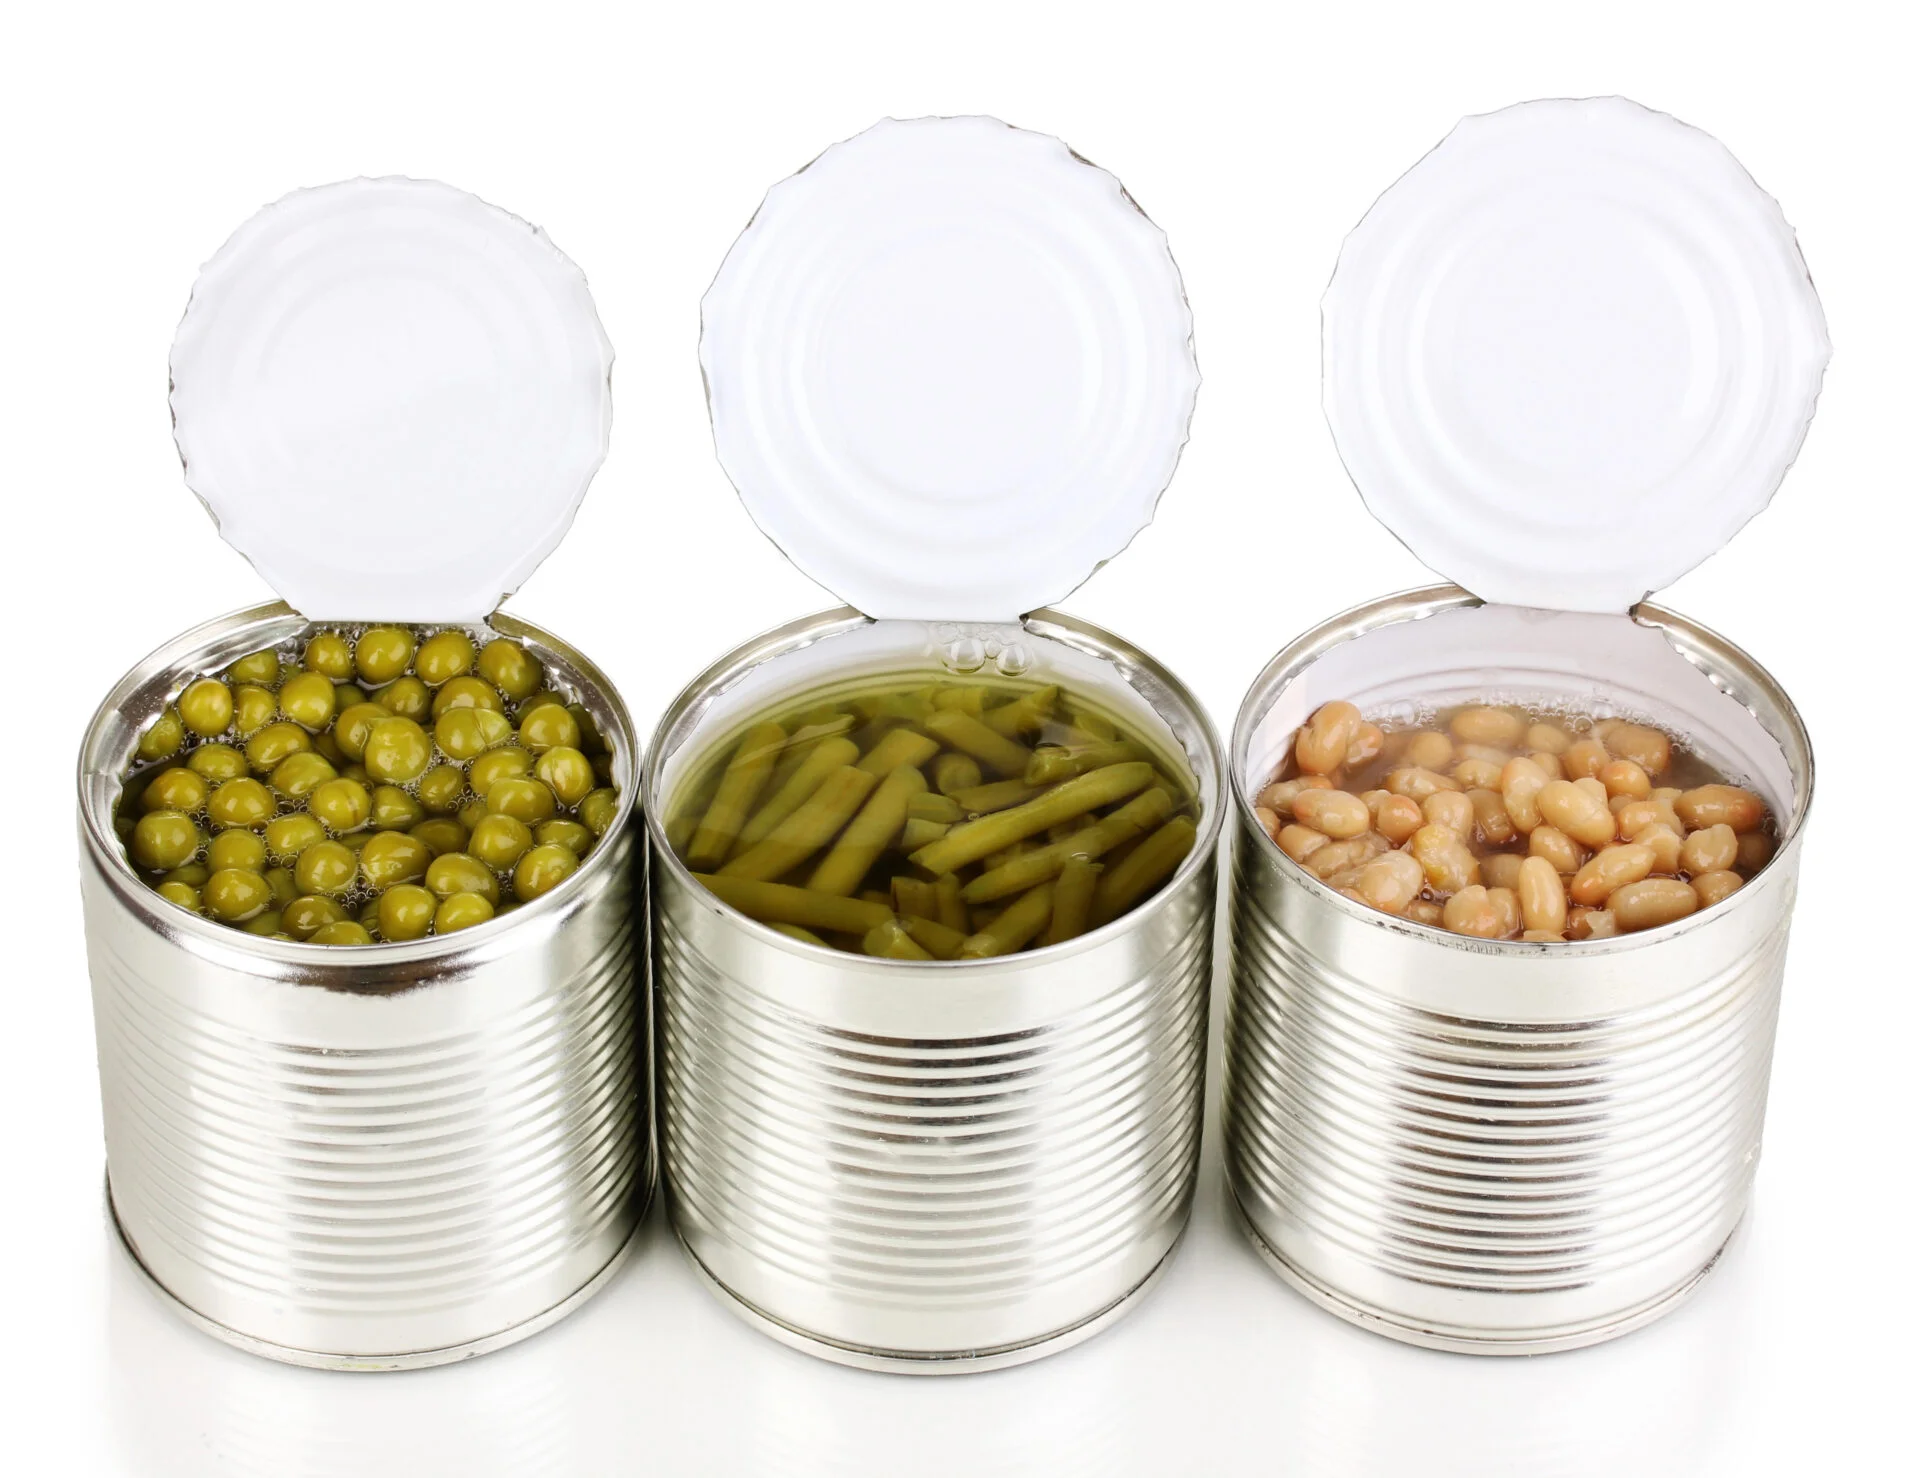 Canned green beans and beans with loads of phthalates and bisphenols